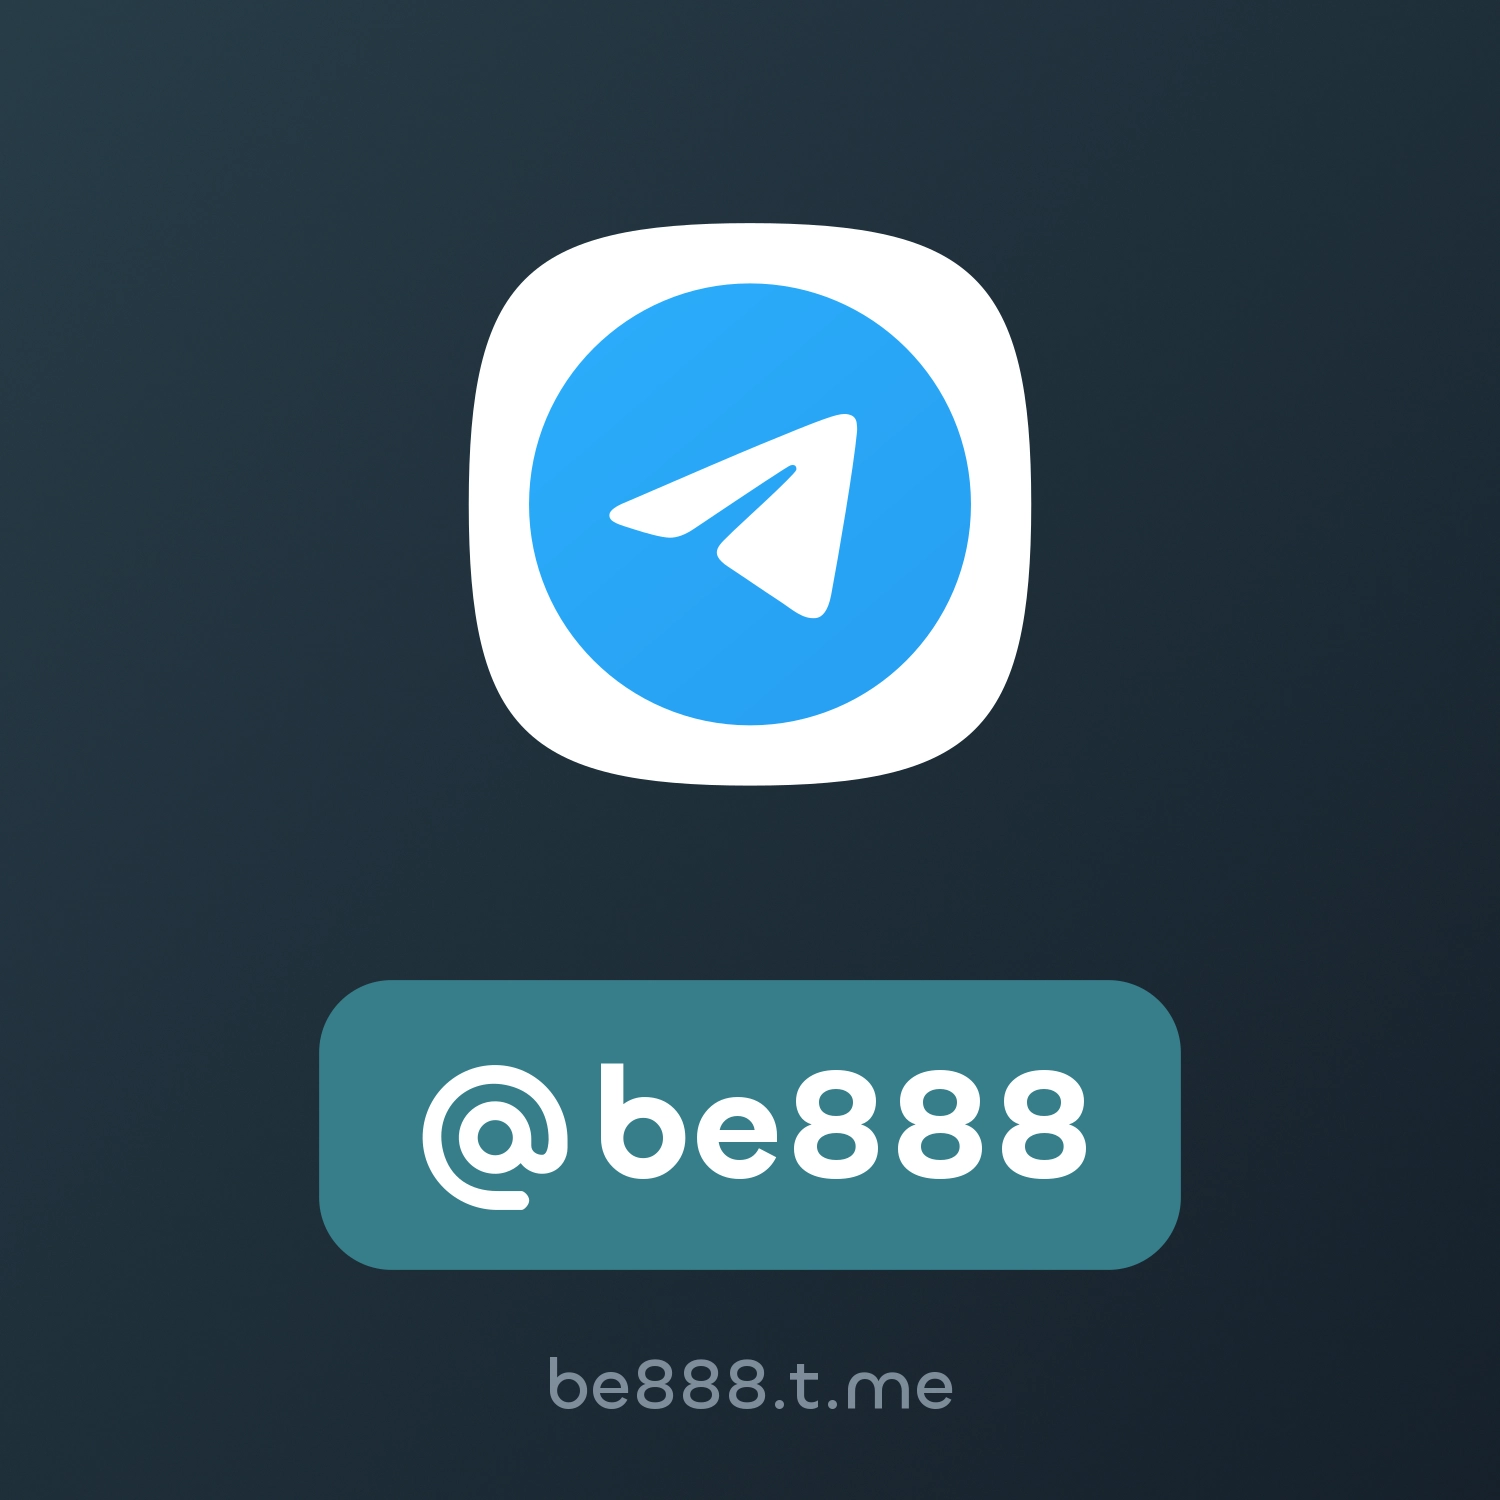 @be888